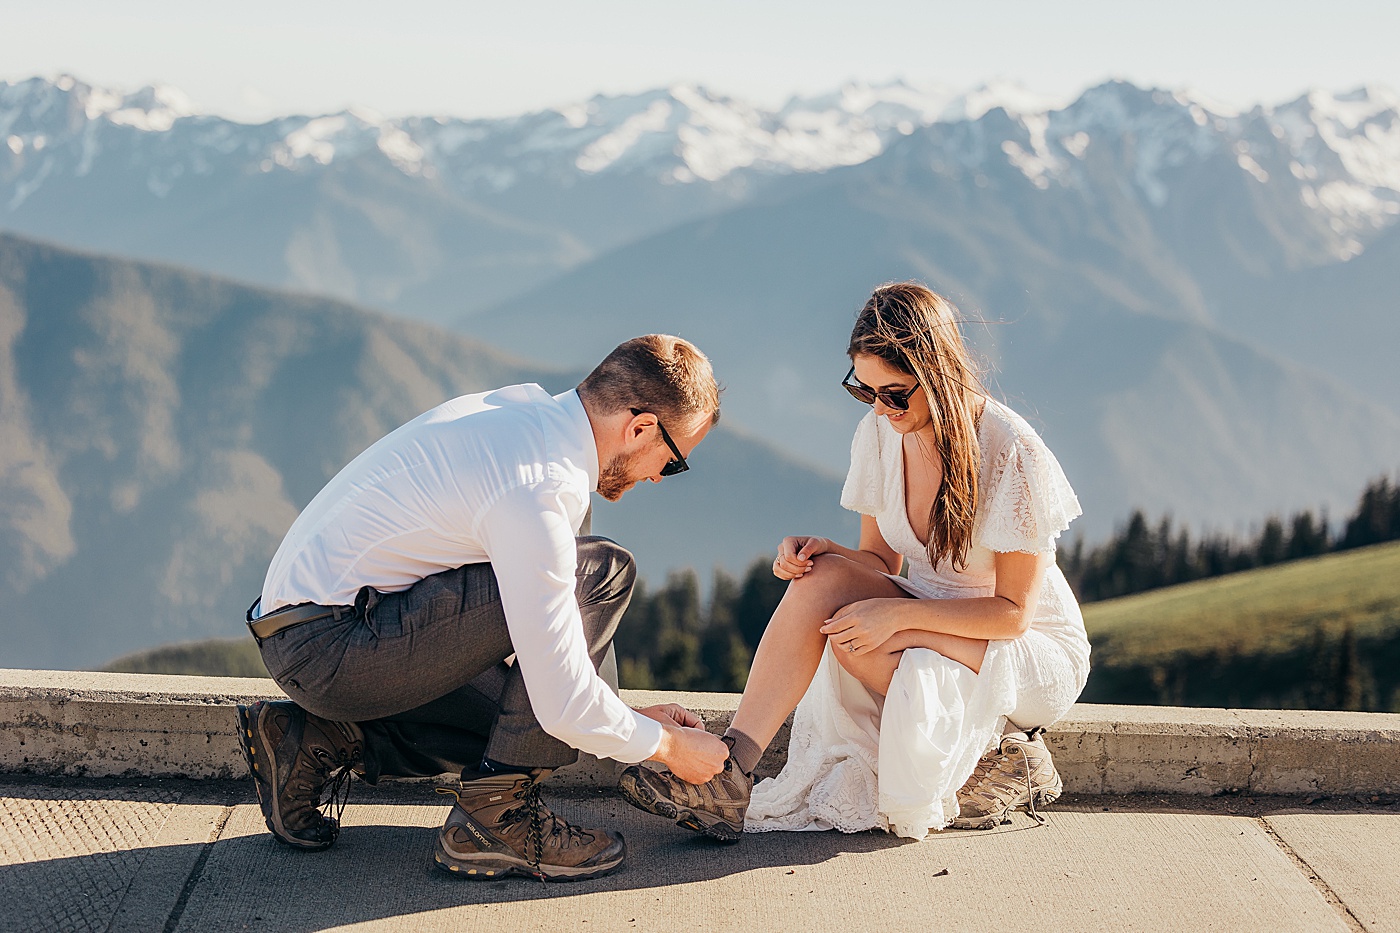 Groom helping bride with hiking shoes | Megan Montalvo Photography